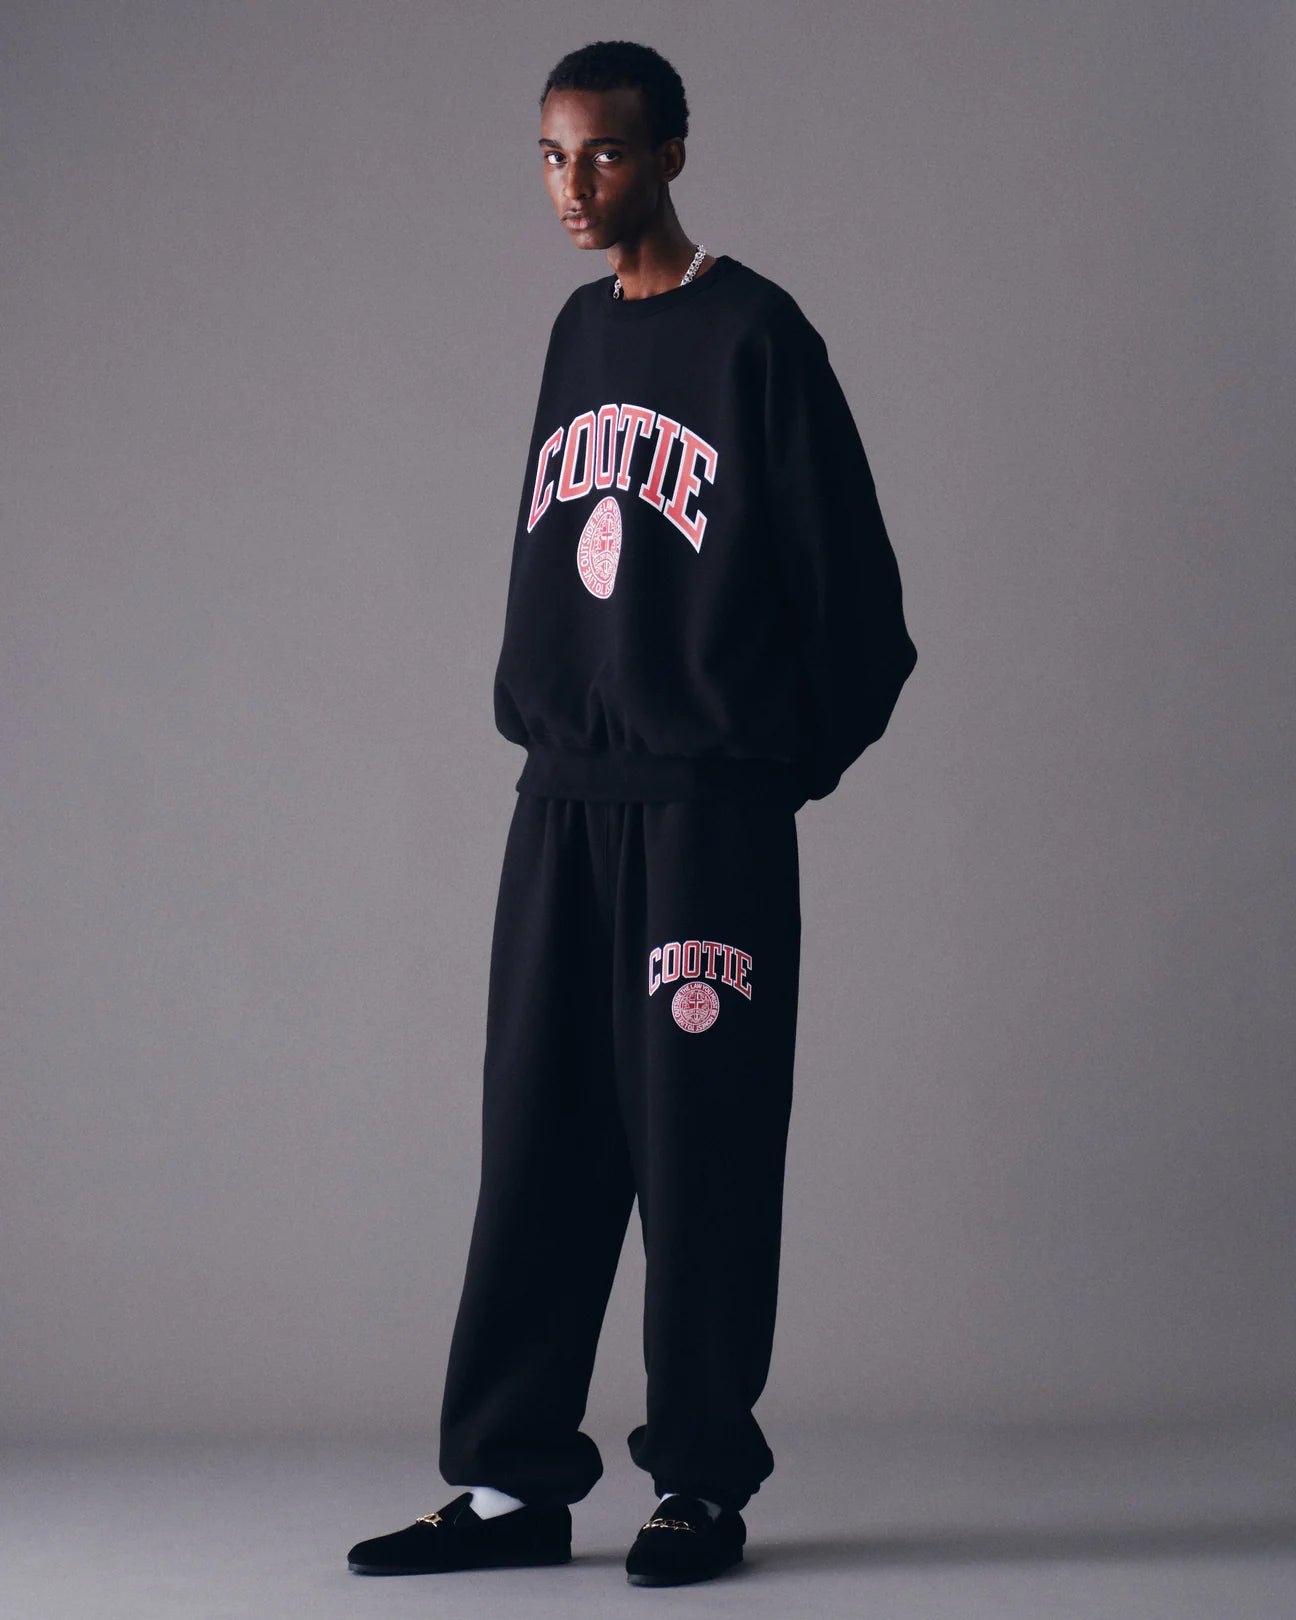 COOTIE PRODUCTIONS HEAVY OZ SWEAT EASY PANTS (COLLEGE)